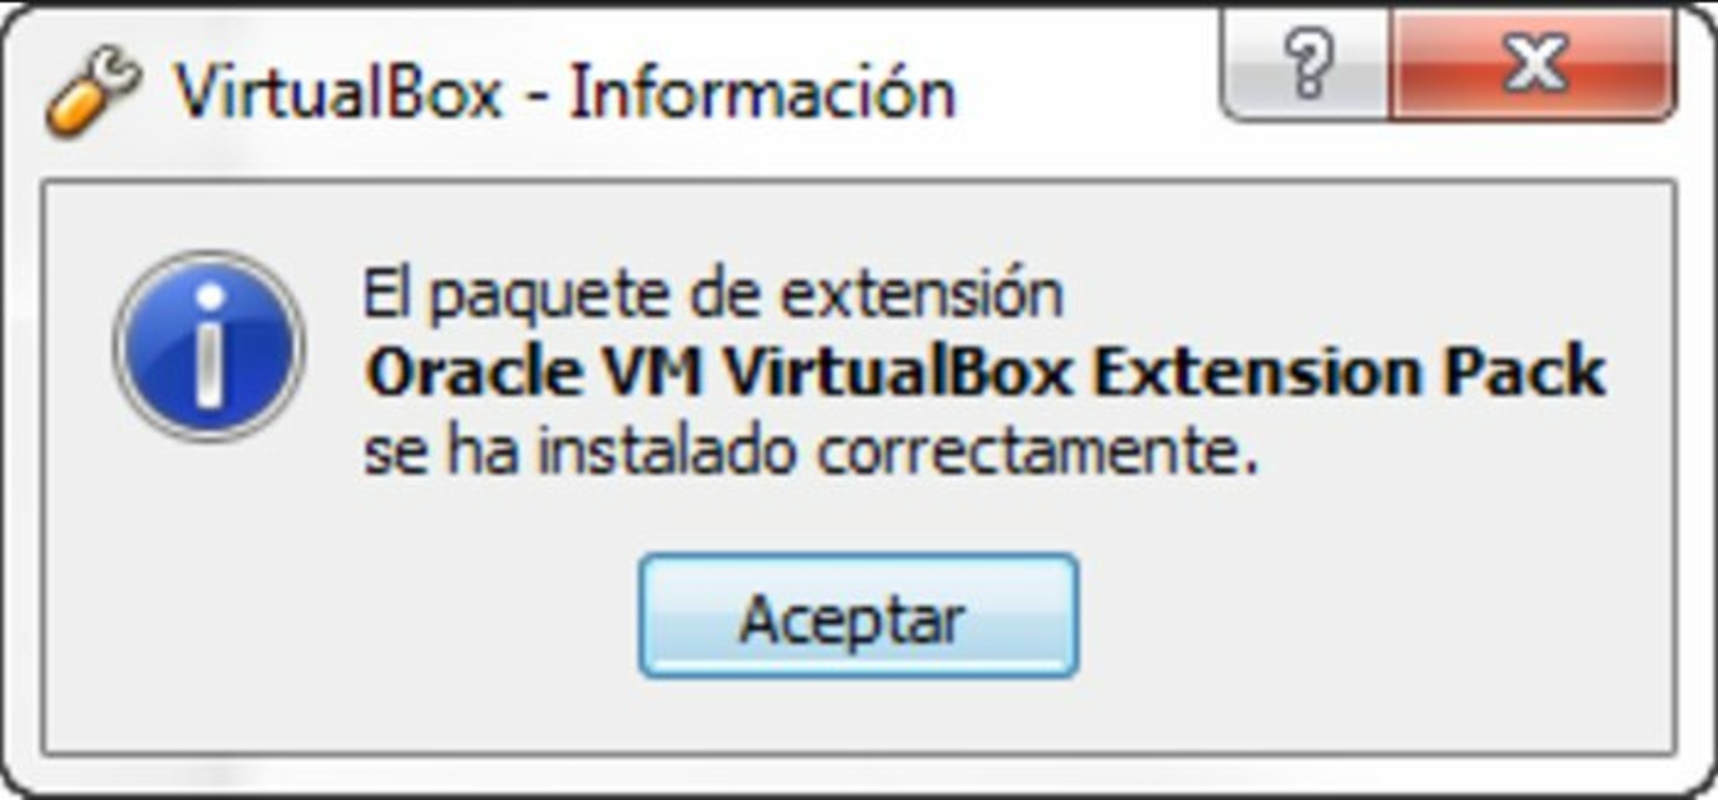 VirtualBox Extension Pack 7.0.10 feature